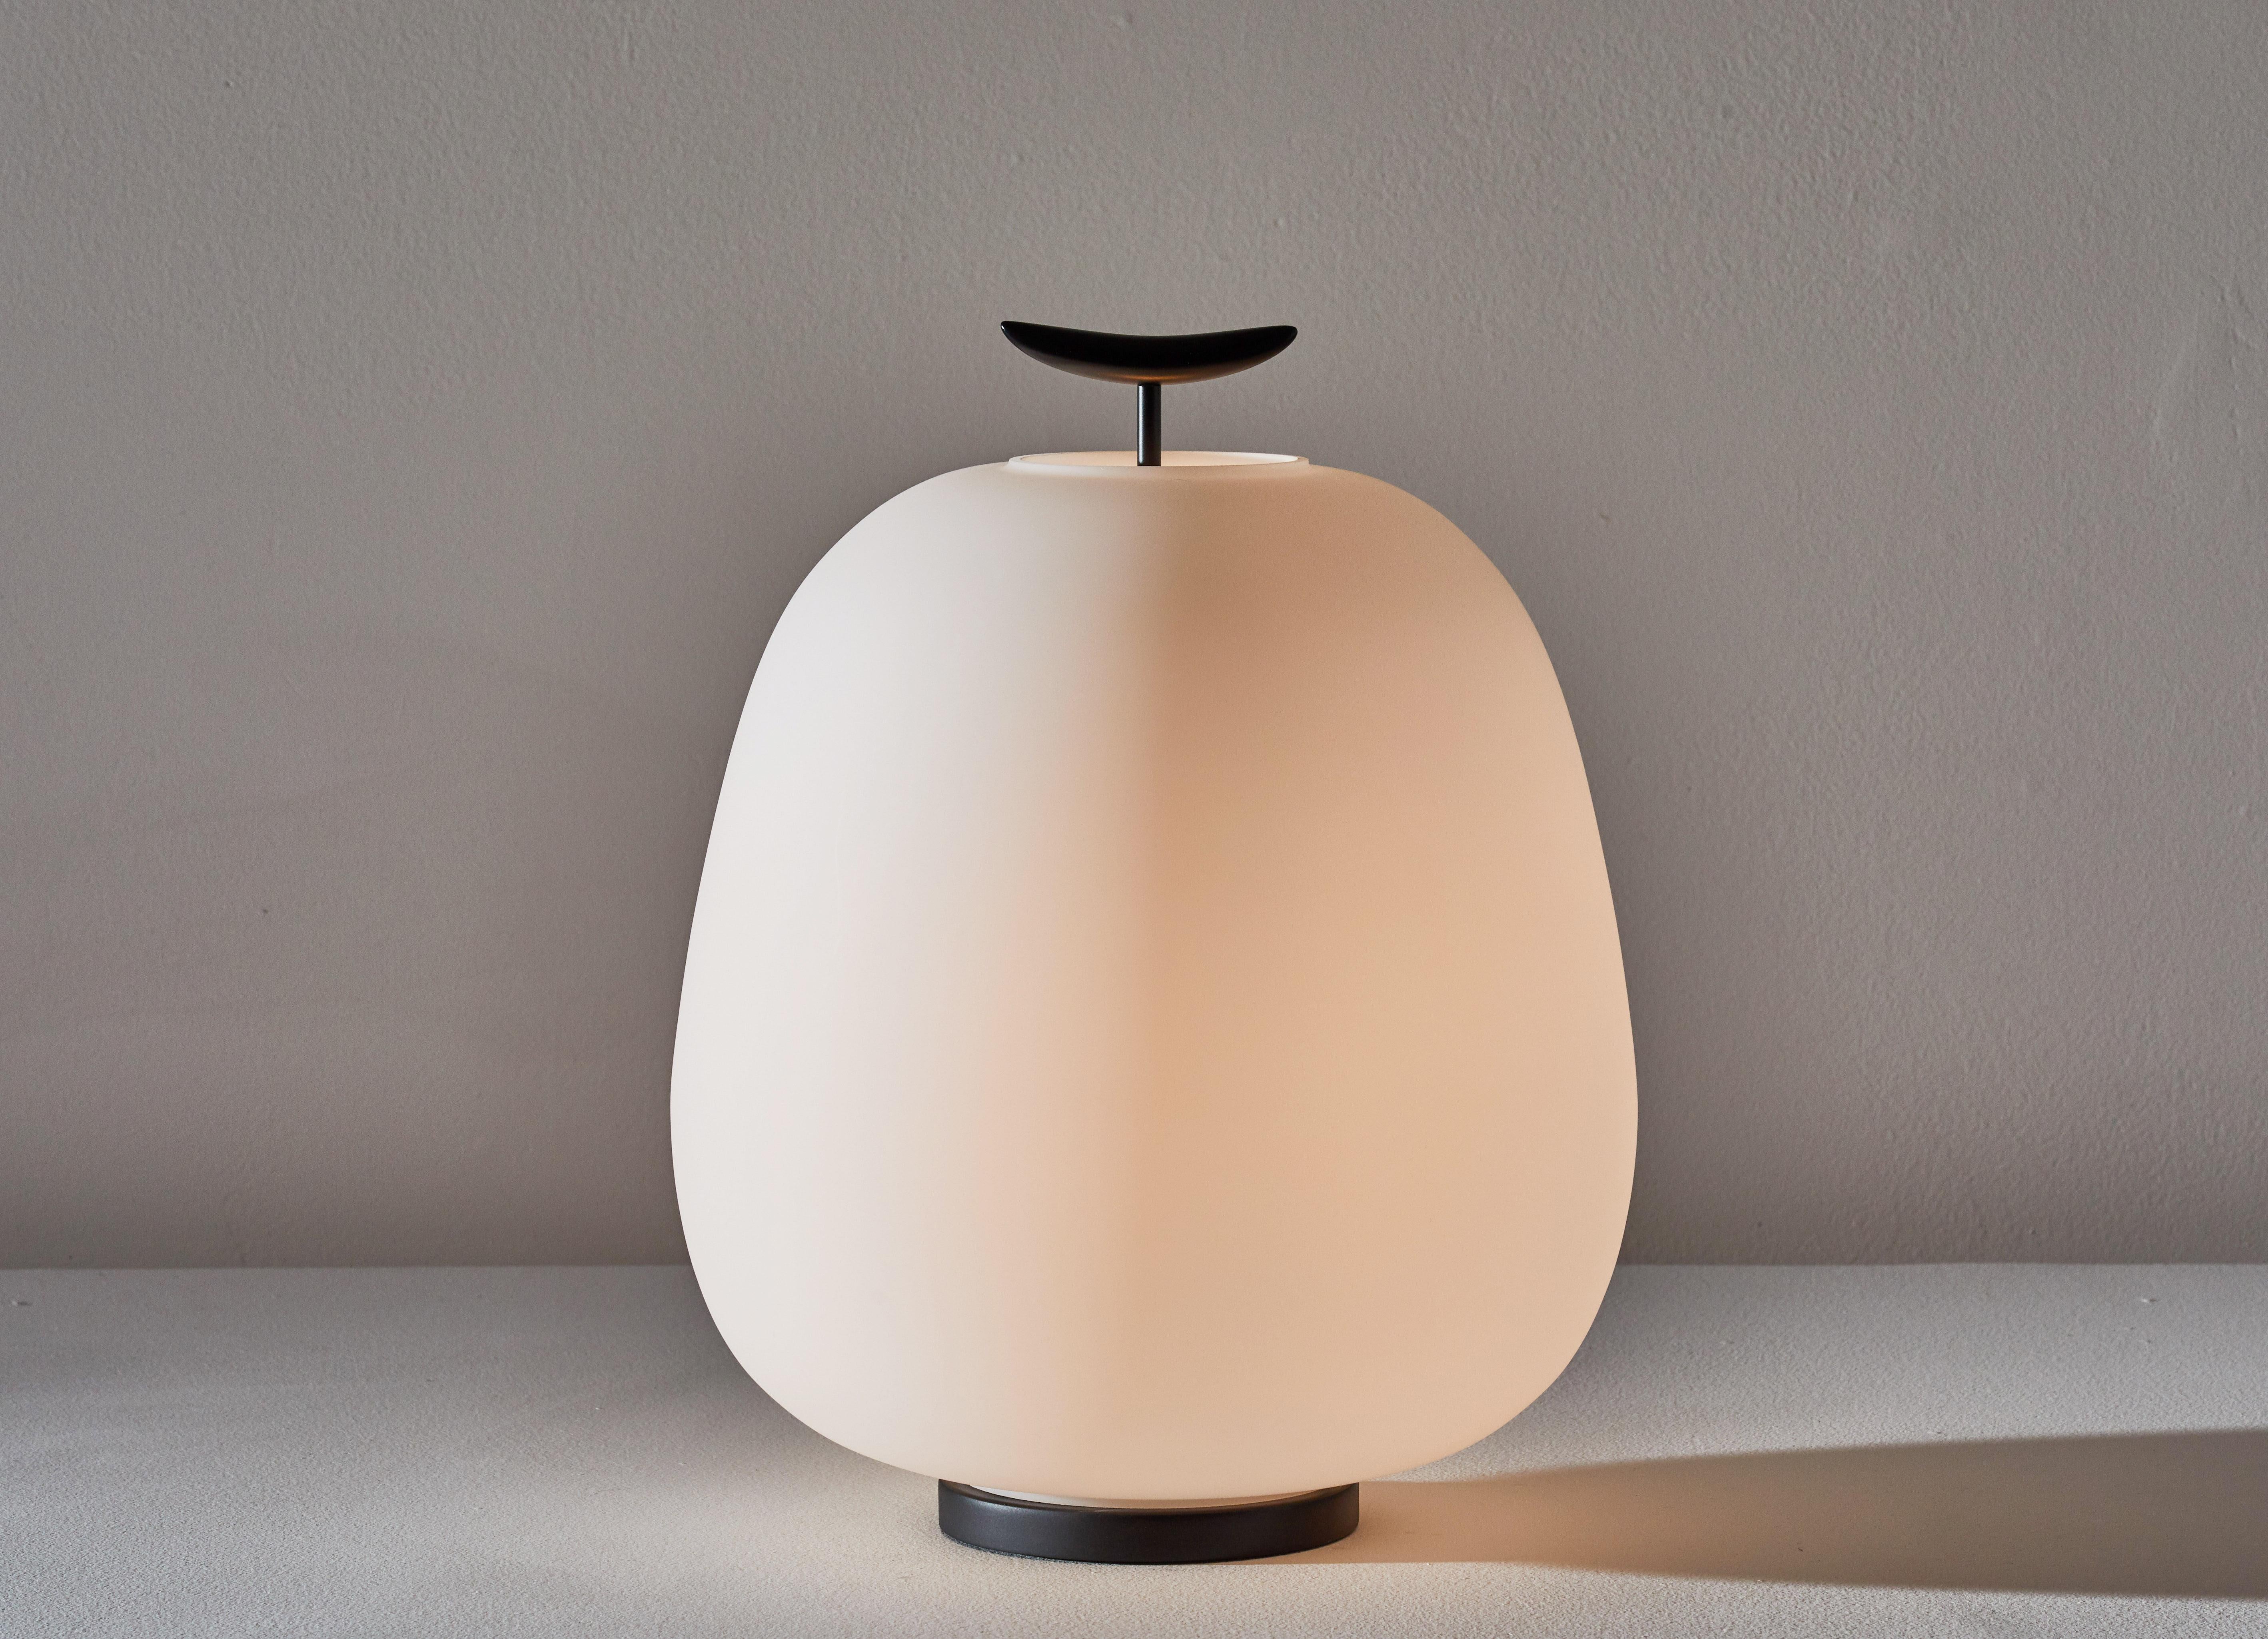 J13 table lamp by Joseph-André Motte for Disderot. Originally designed in 1959. This is a licensed, current production manufactured in France by Disderot. Brushed satin glass diffuser, enameled metal. Numbered edition, delivered with authentication